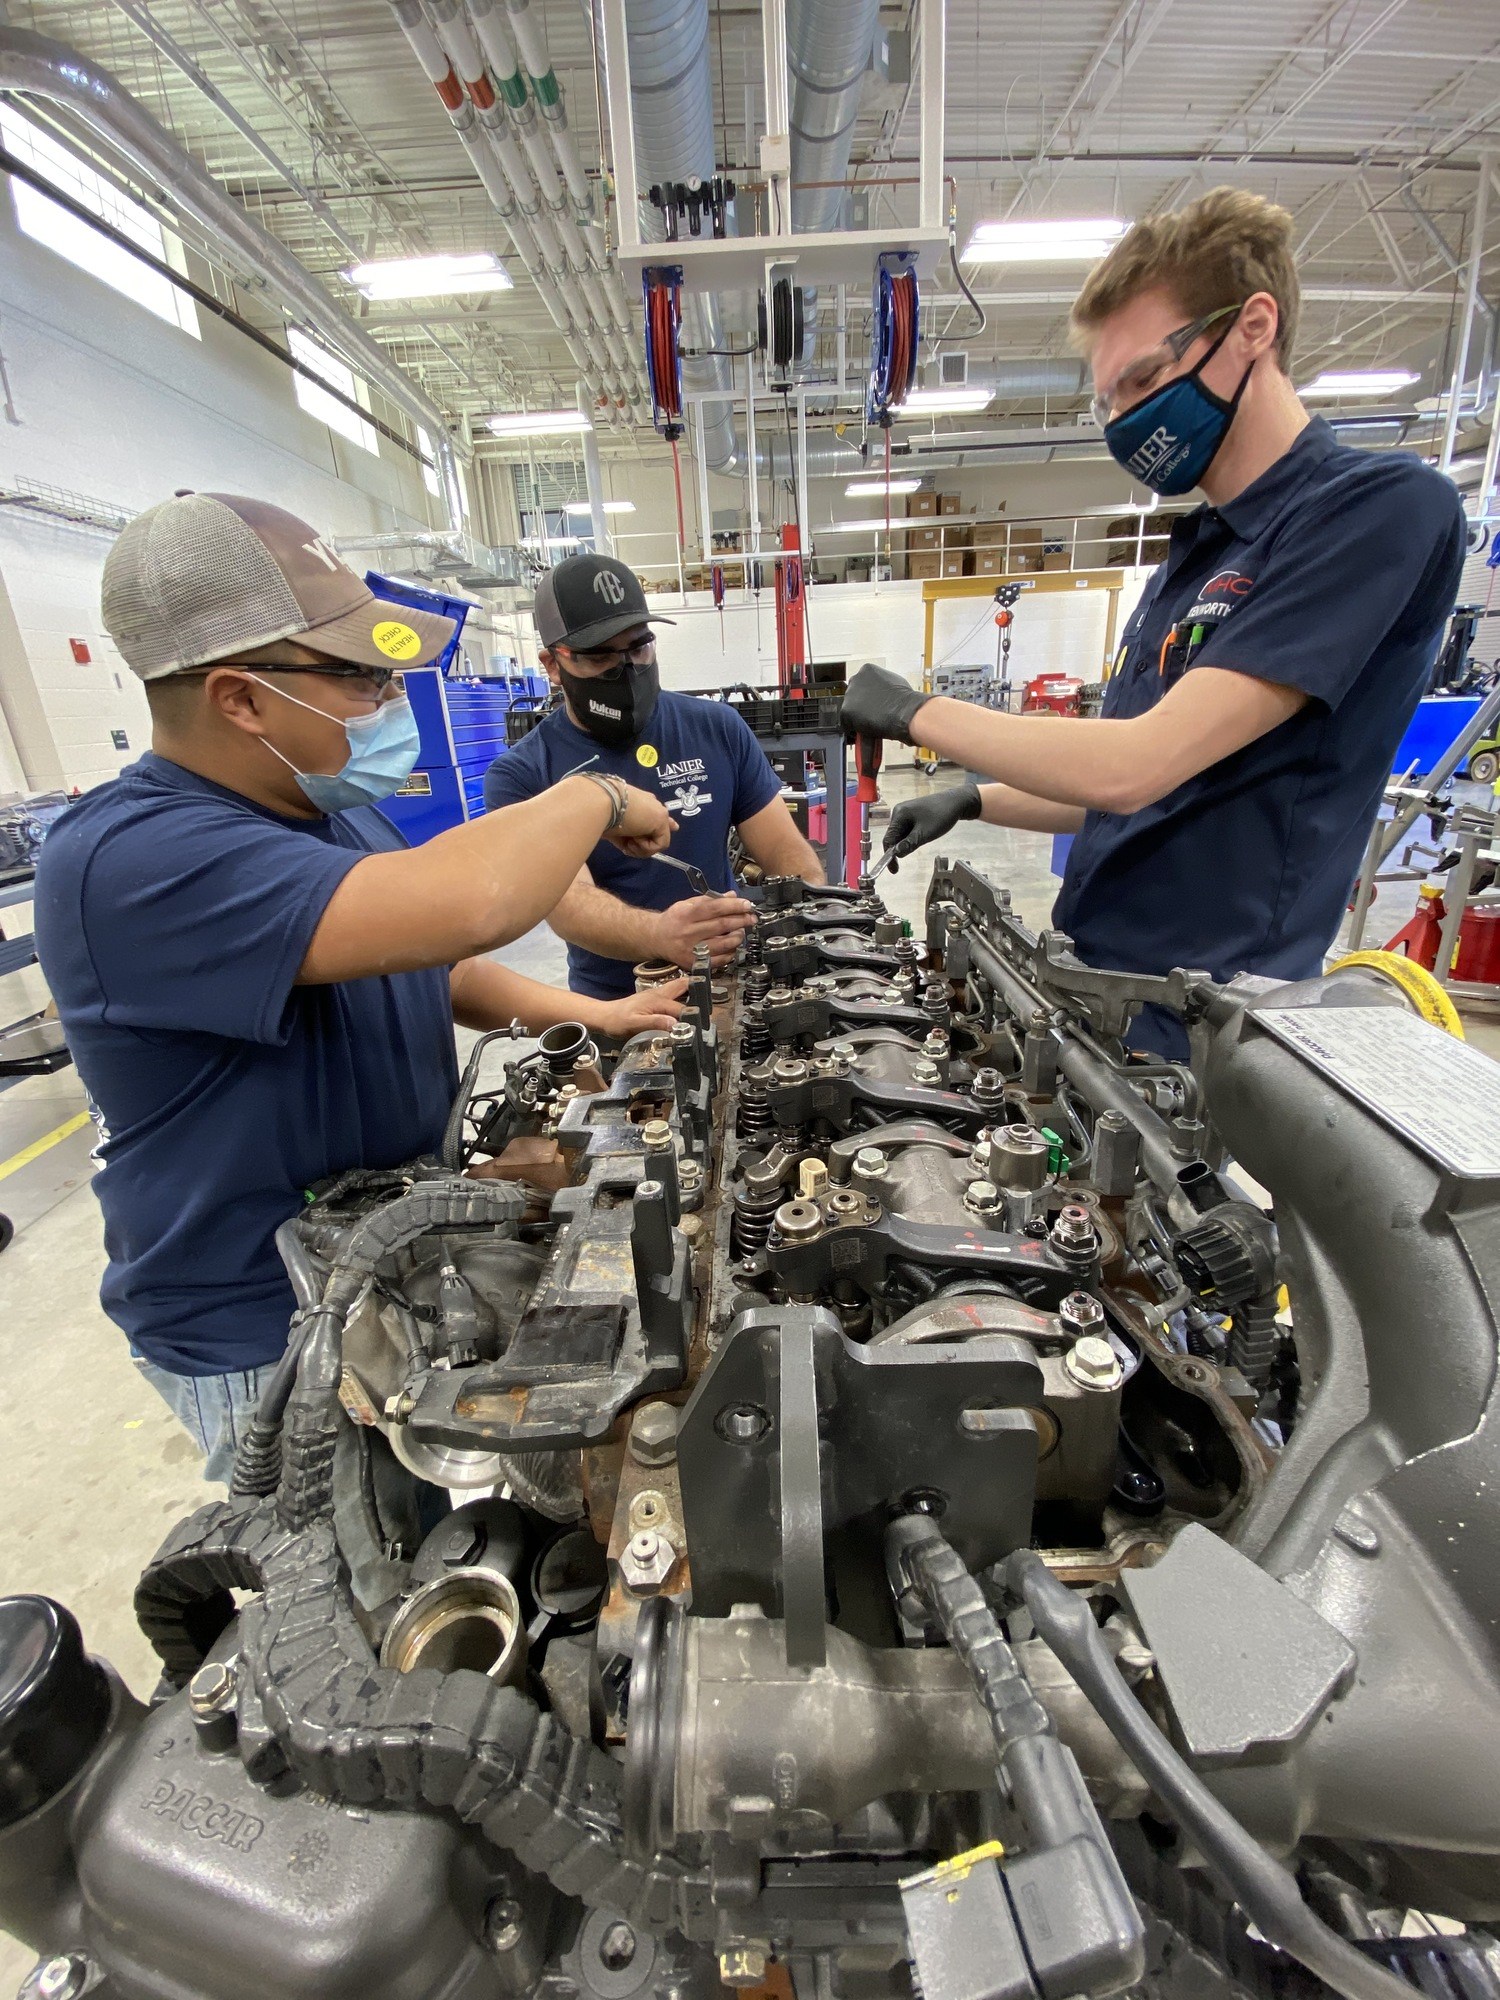 Students from Diesel Equipment Technology Program working on engine